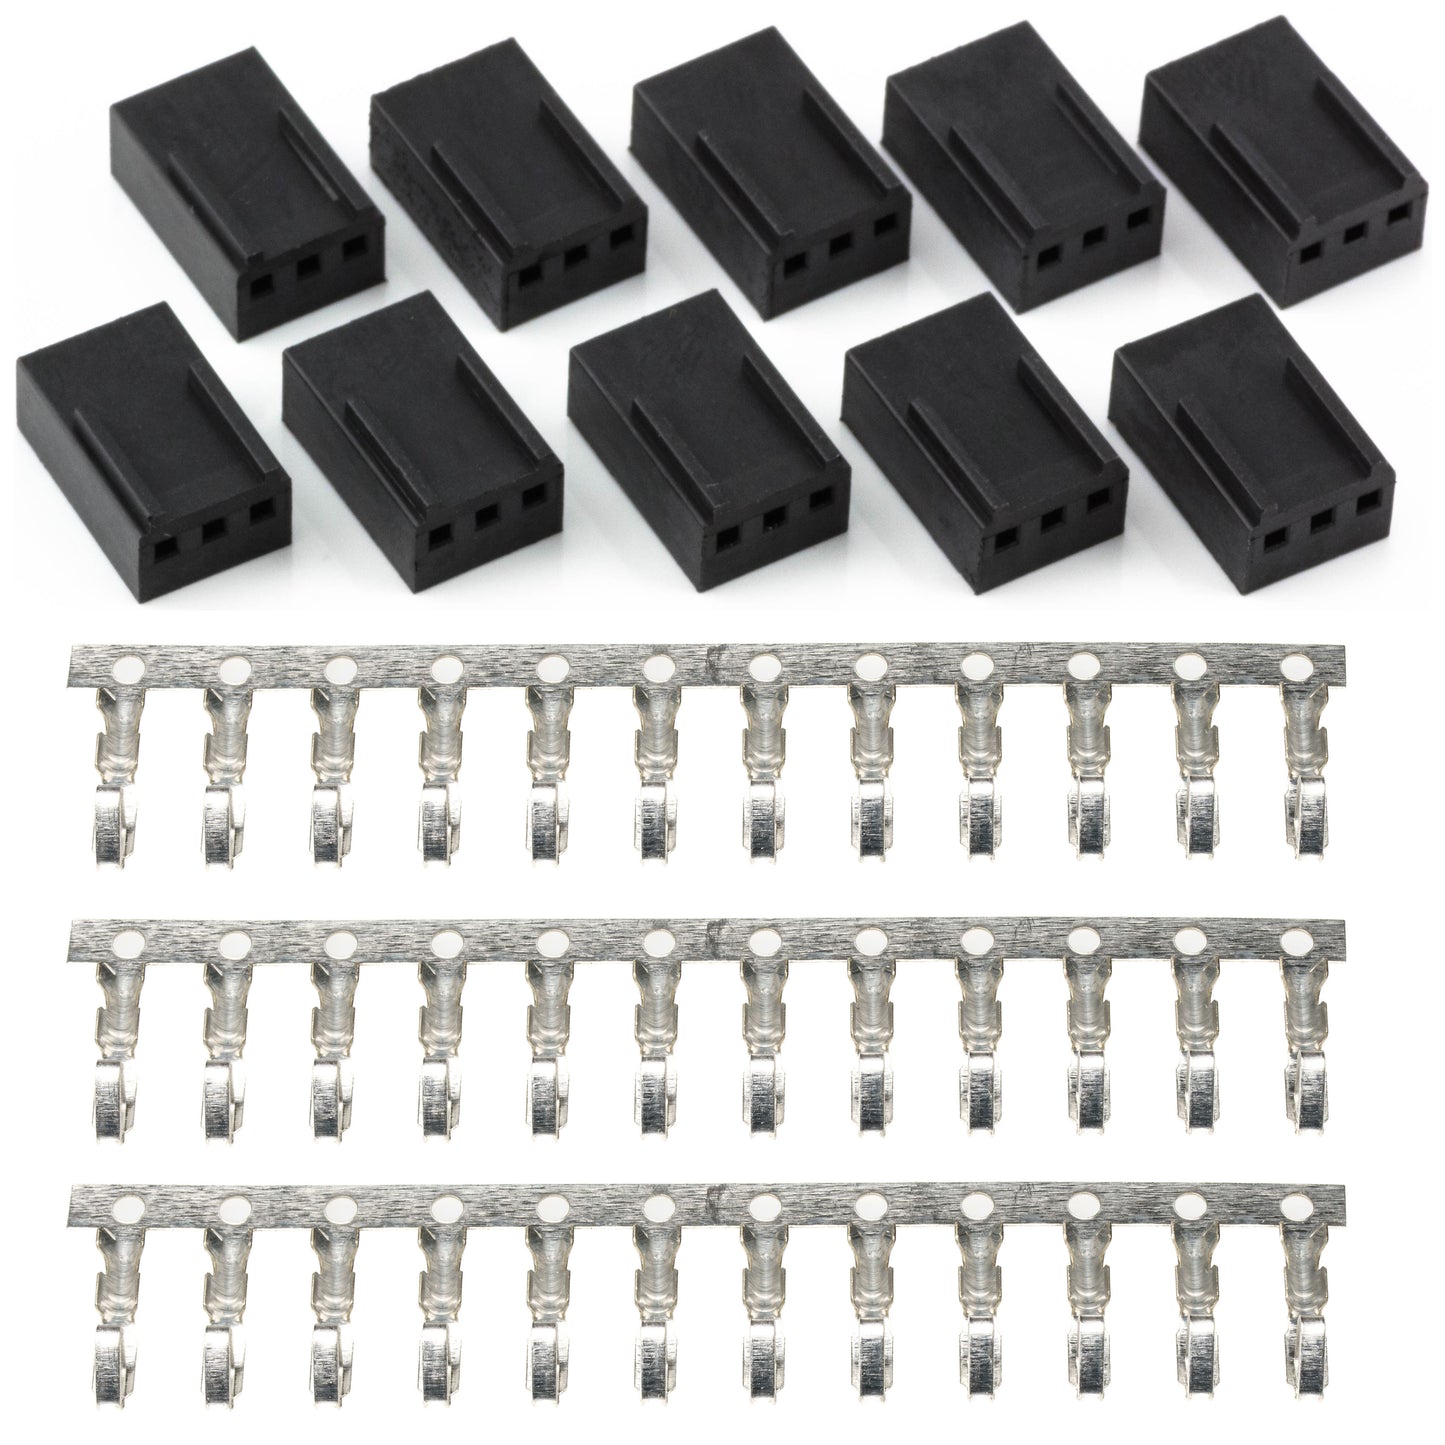 Female 3-Pin PC Fan Connector Kit - 10 Pack